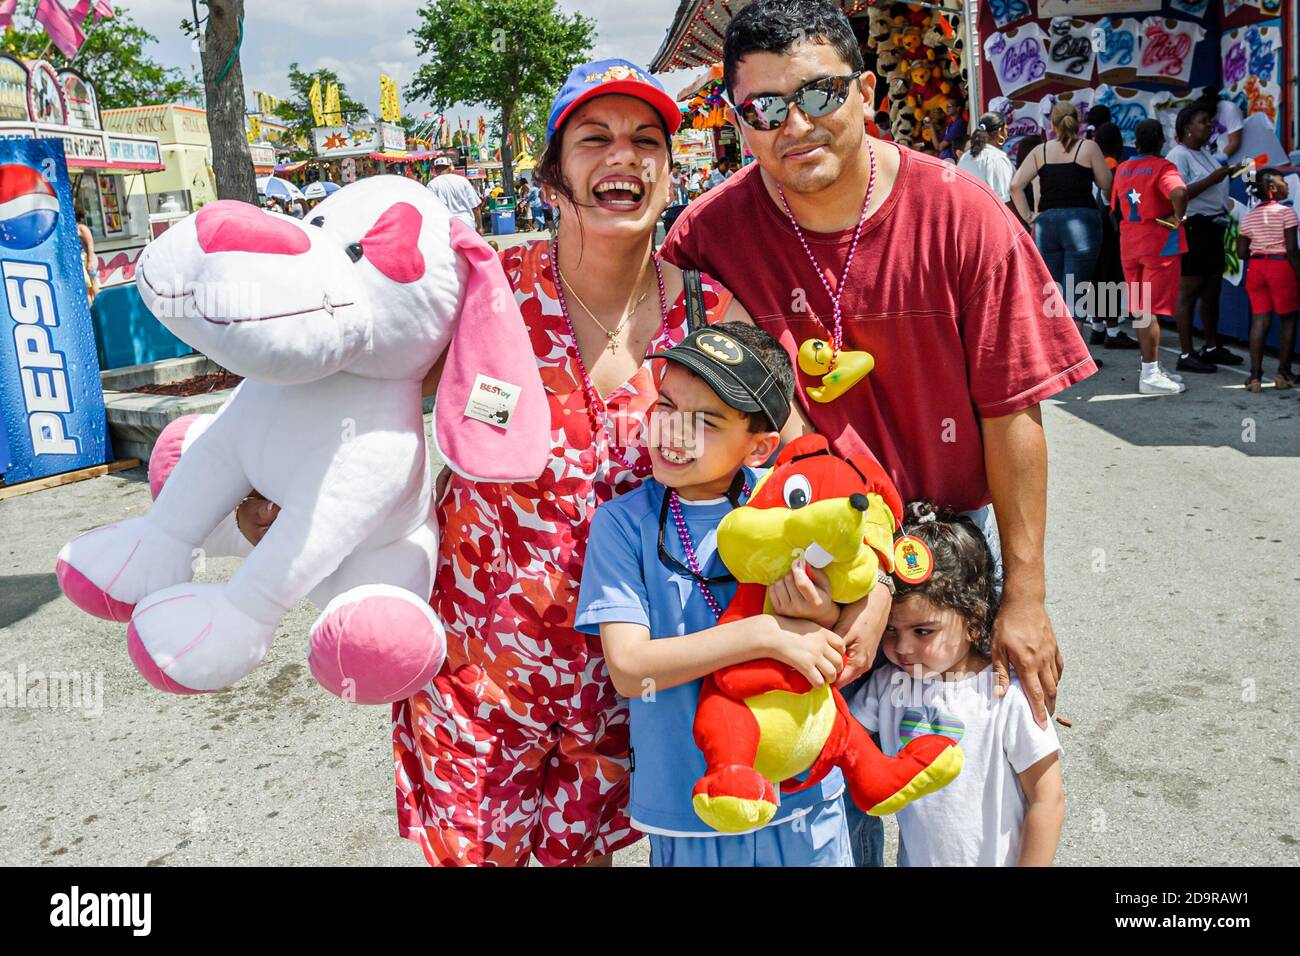 Miami Florida,Dade County Fair & Exposition,annual event carnival midway game prizes stuffed animals,Hispanic family parents children mother father, Stock Photo